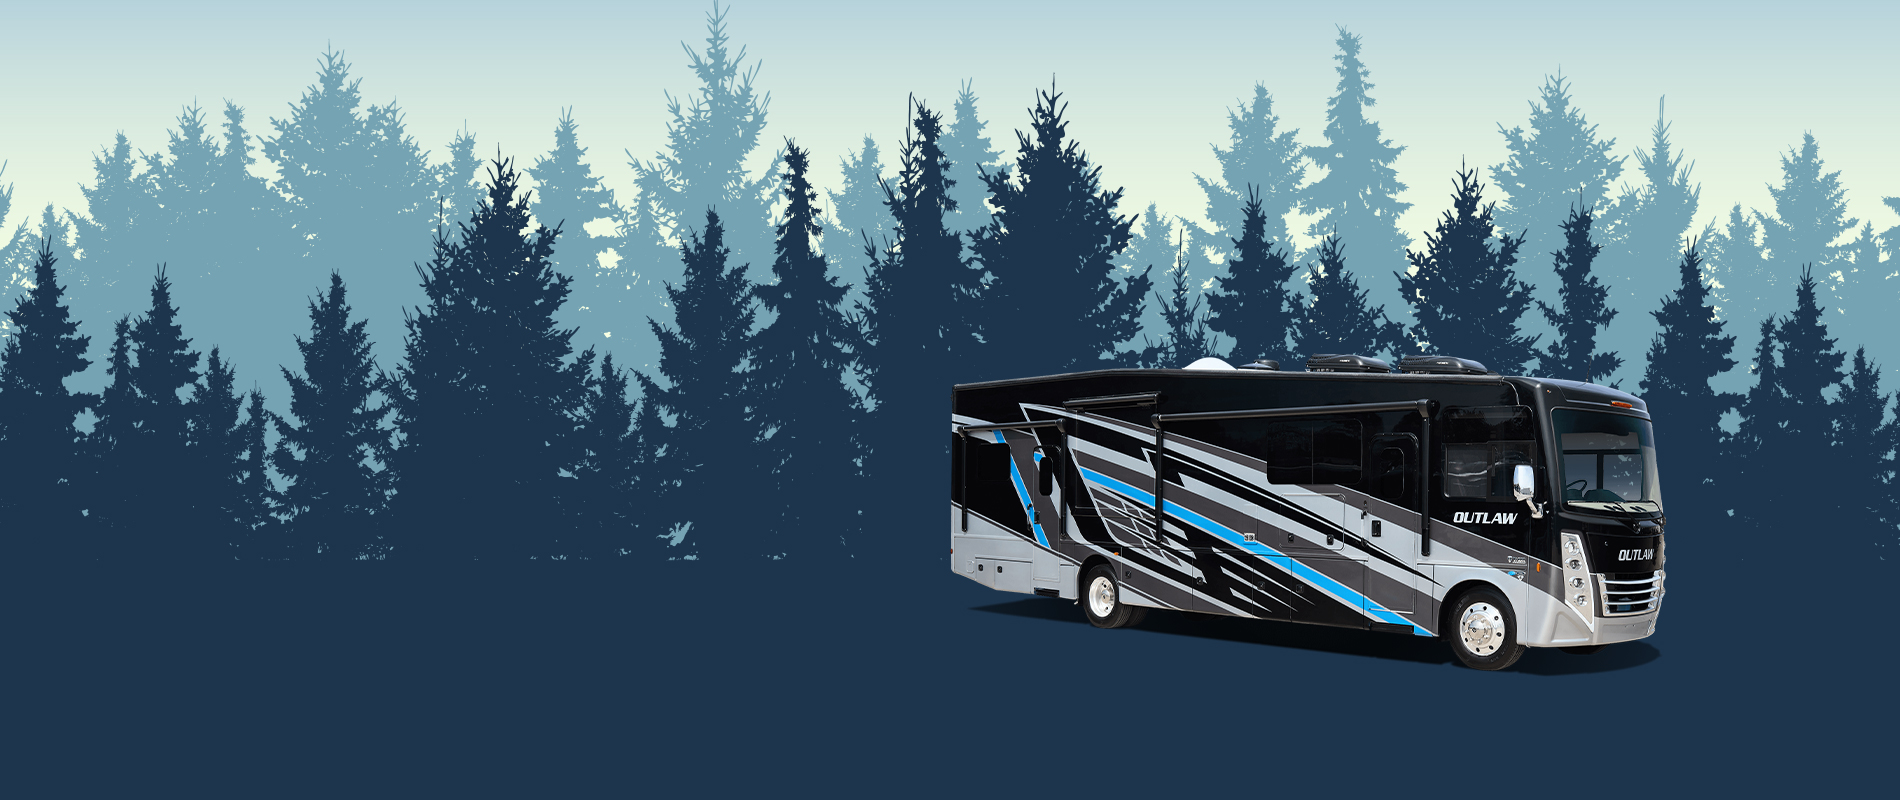 Thor Outlaw Class A Toy Hauler Motorhomes - Thor Motor Coach